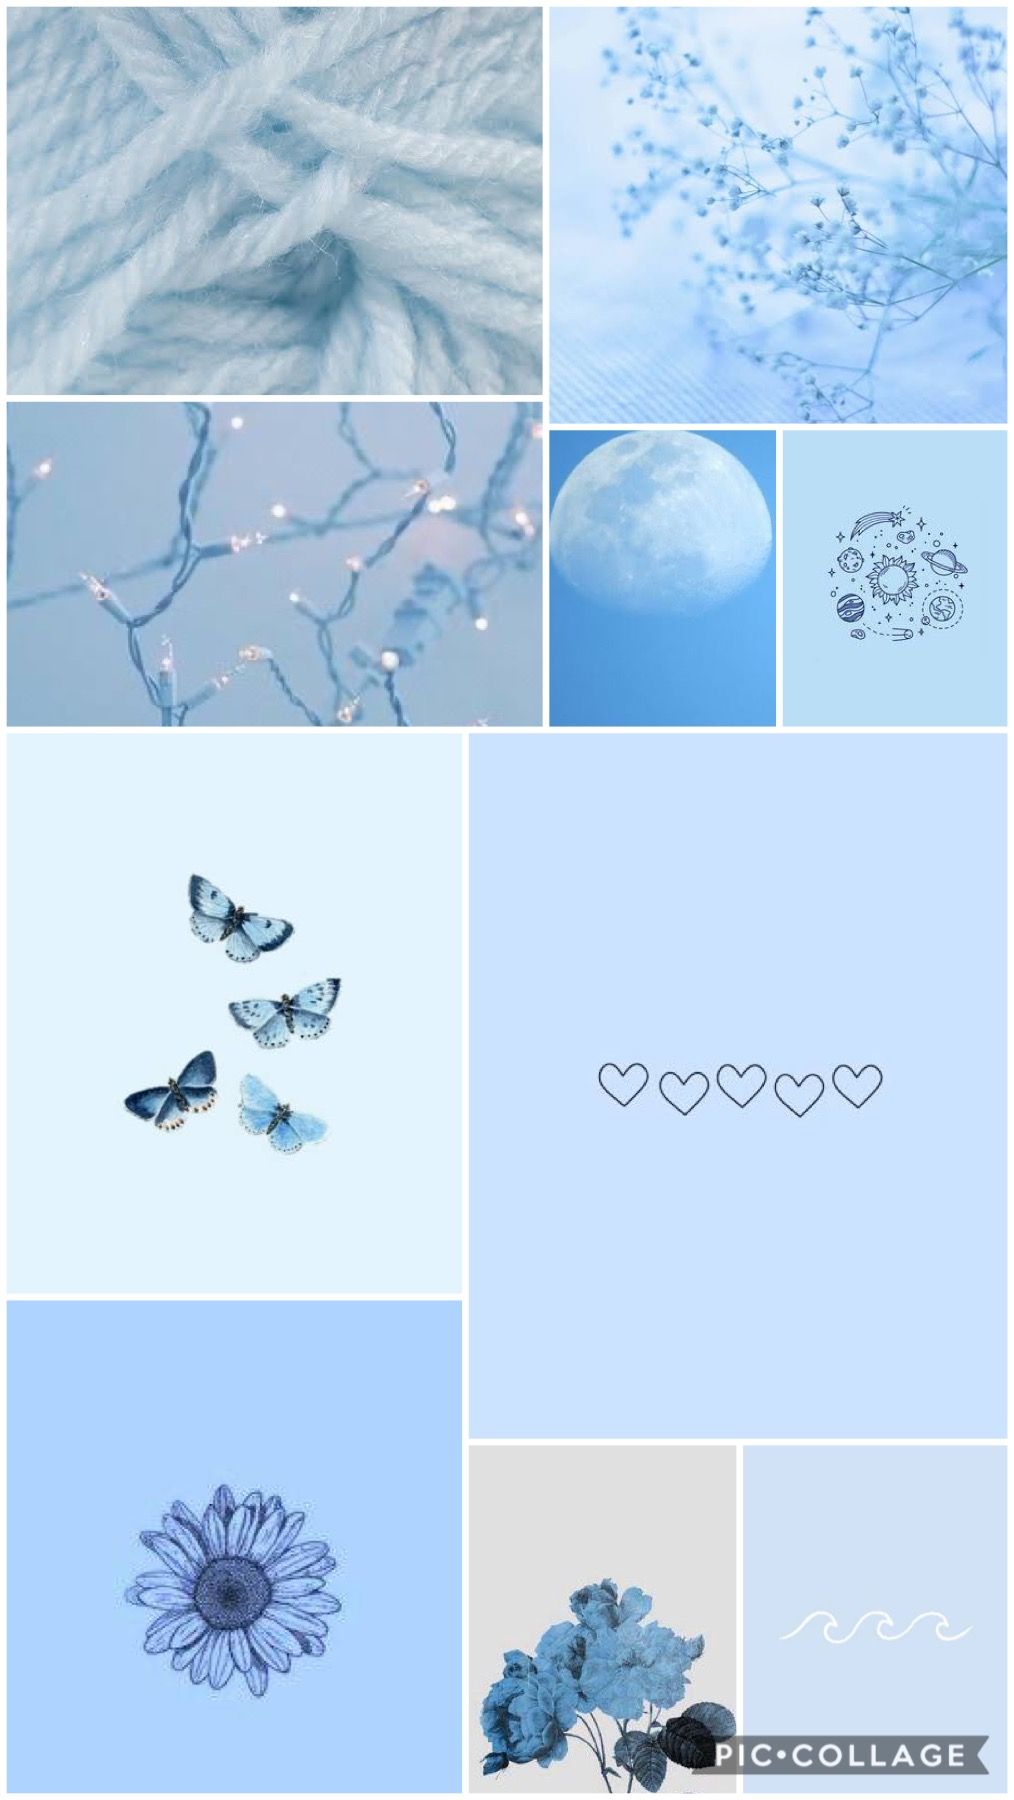 Baby Blue Aesthetic Wallpaper. Blue background wallpaper, Cute blue wallpaper, Blue aesthetic